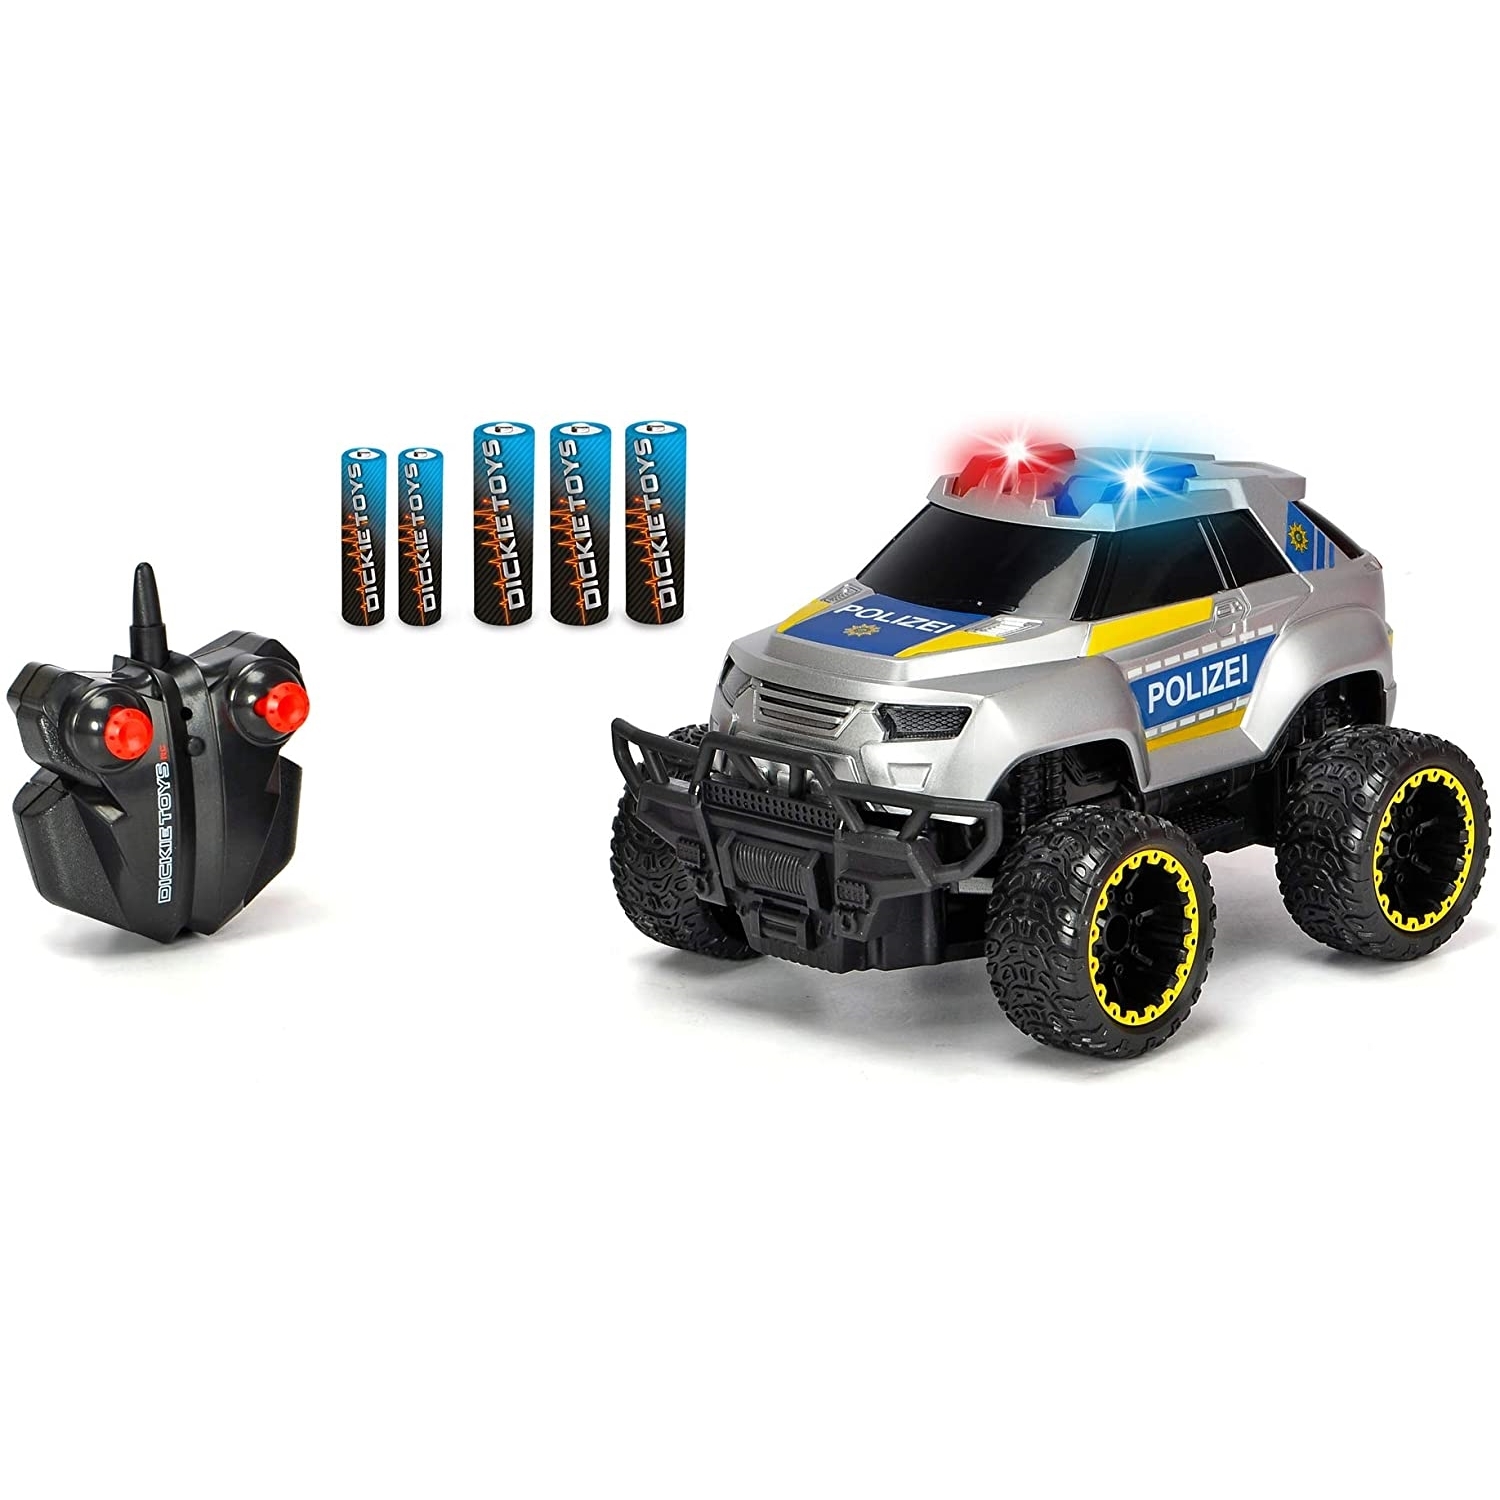 Dickie Rc Police Offroader Rtr